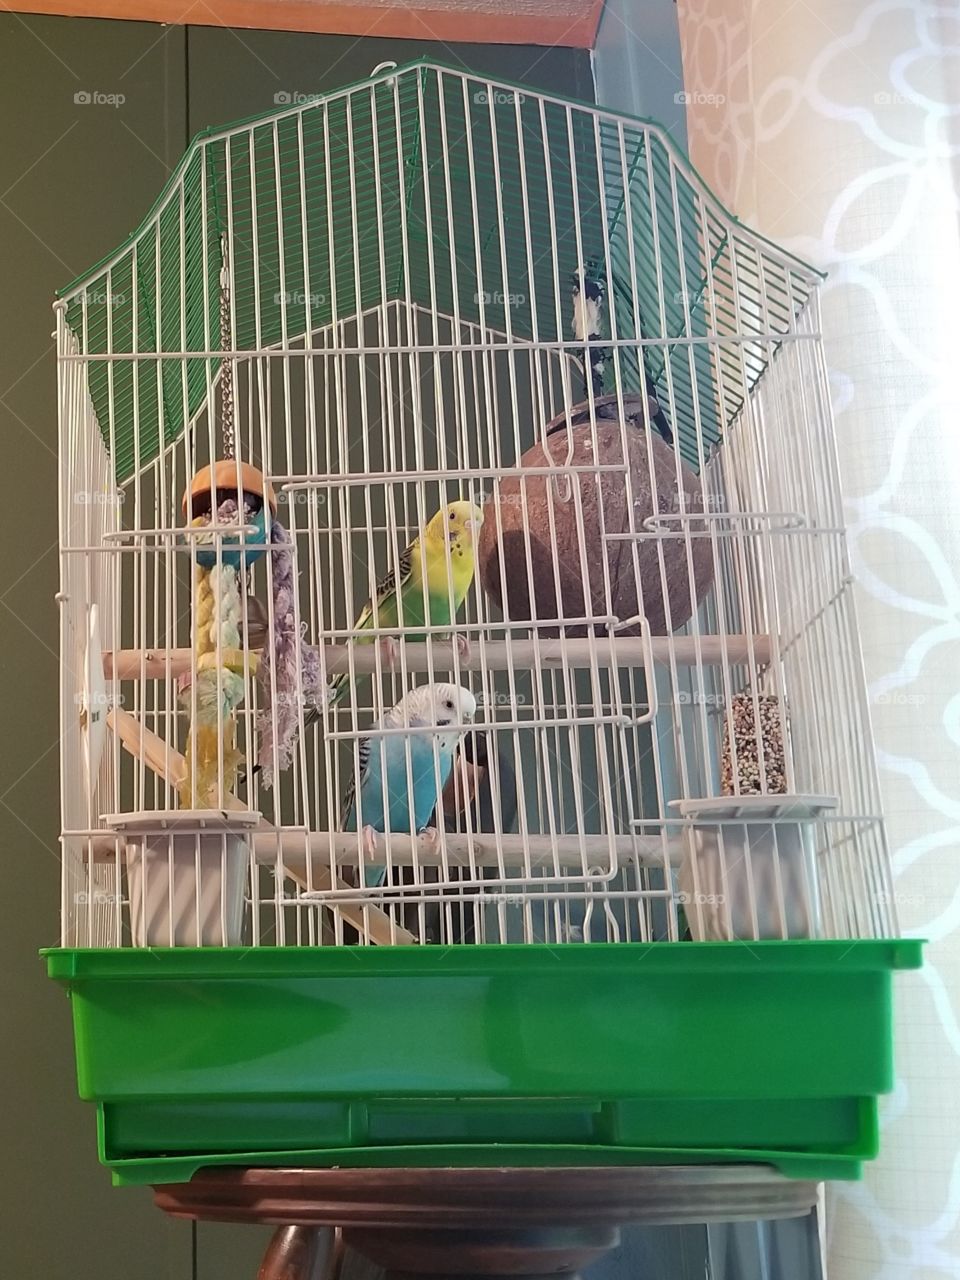 parakeets in cage